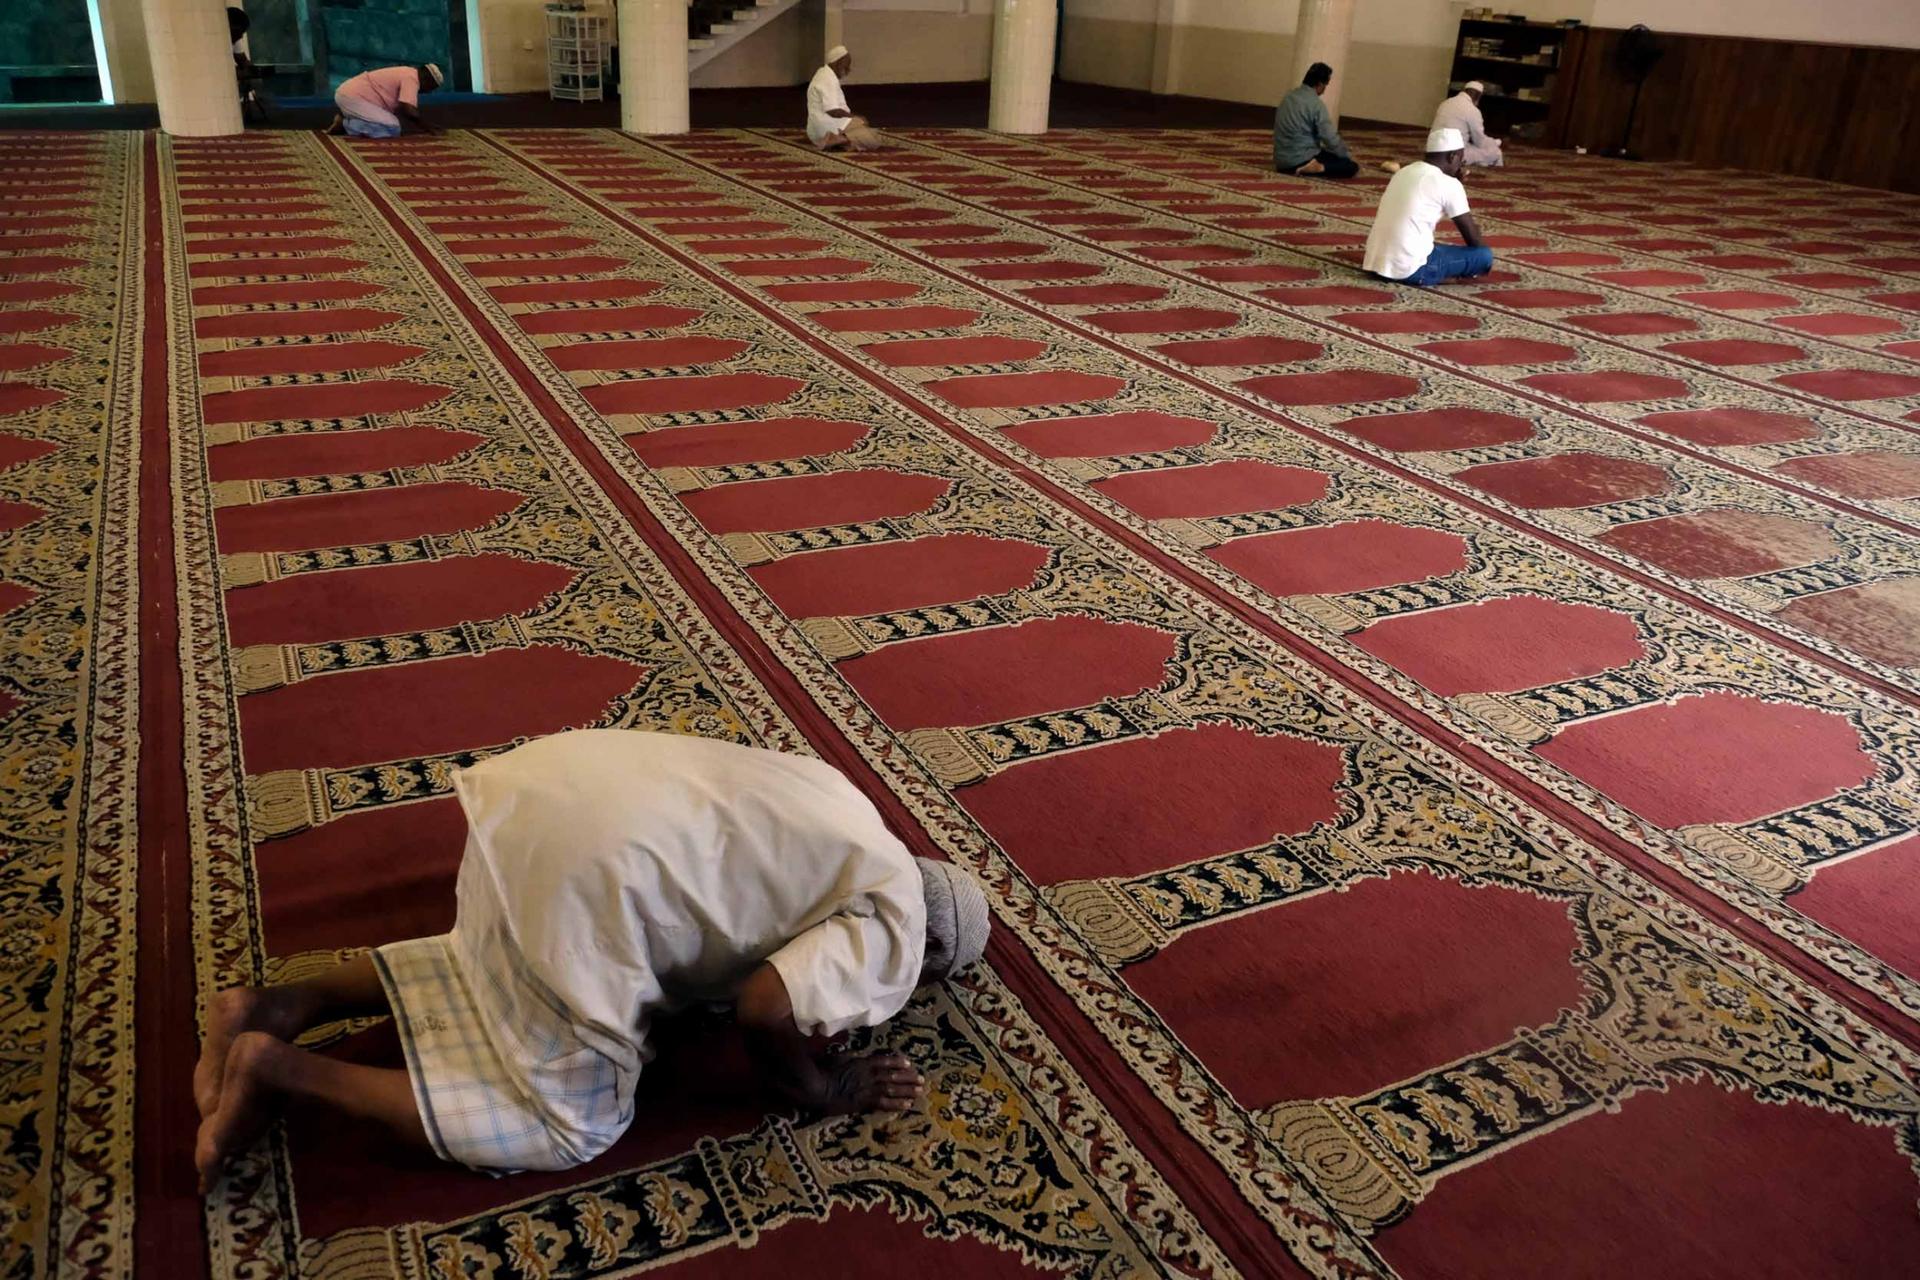 A few men are praying in a mosque